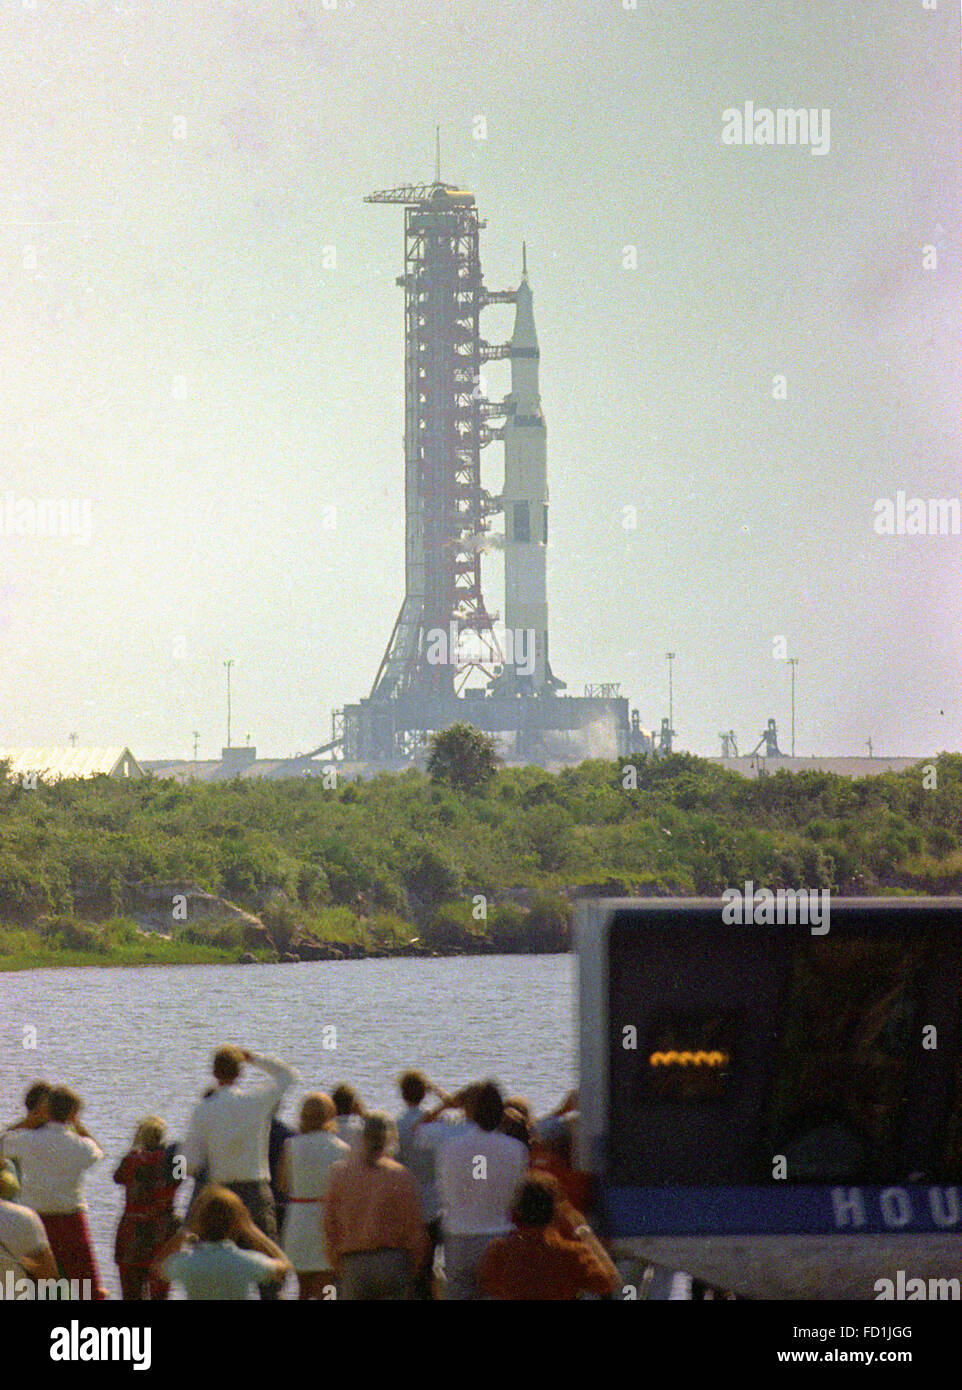 The Saturn V SA-506 launch vehicle with the Apollo 11 astronauts and equipment aboard, is pictured in the seconds prior to lift-off from Launch Complex 39A at the Kennedy Space Center at Cape Canaveral, Florida on Wednesday, July 16, 1969. It will launch the first manned mission to land on the Moon. Credit: Ron Sachs / CNP - NO WIRE SERVICE - Stock Photo